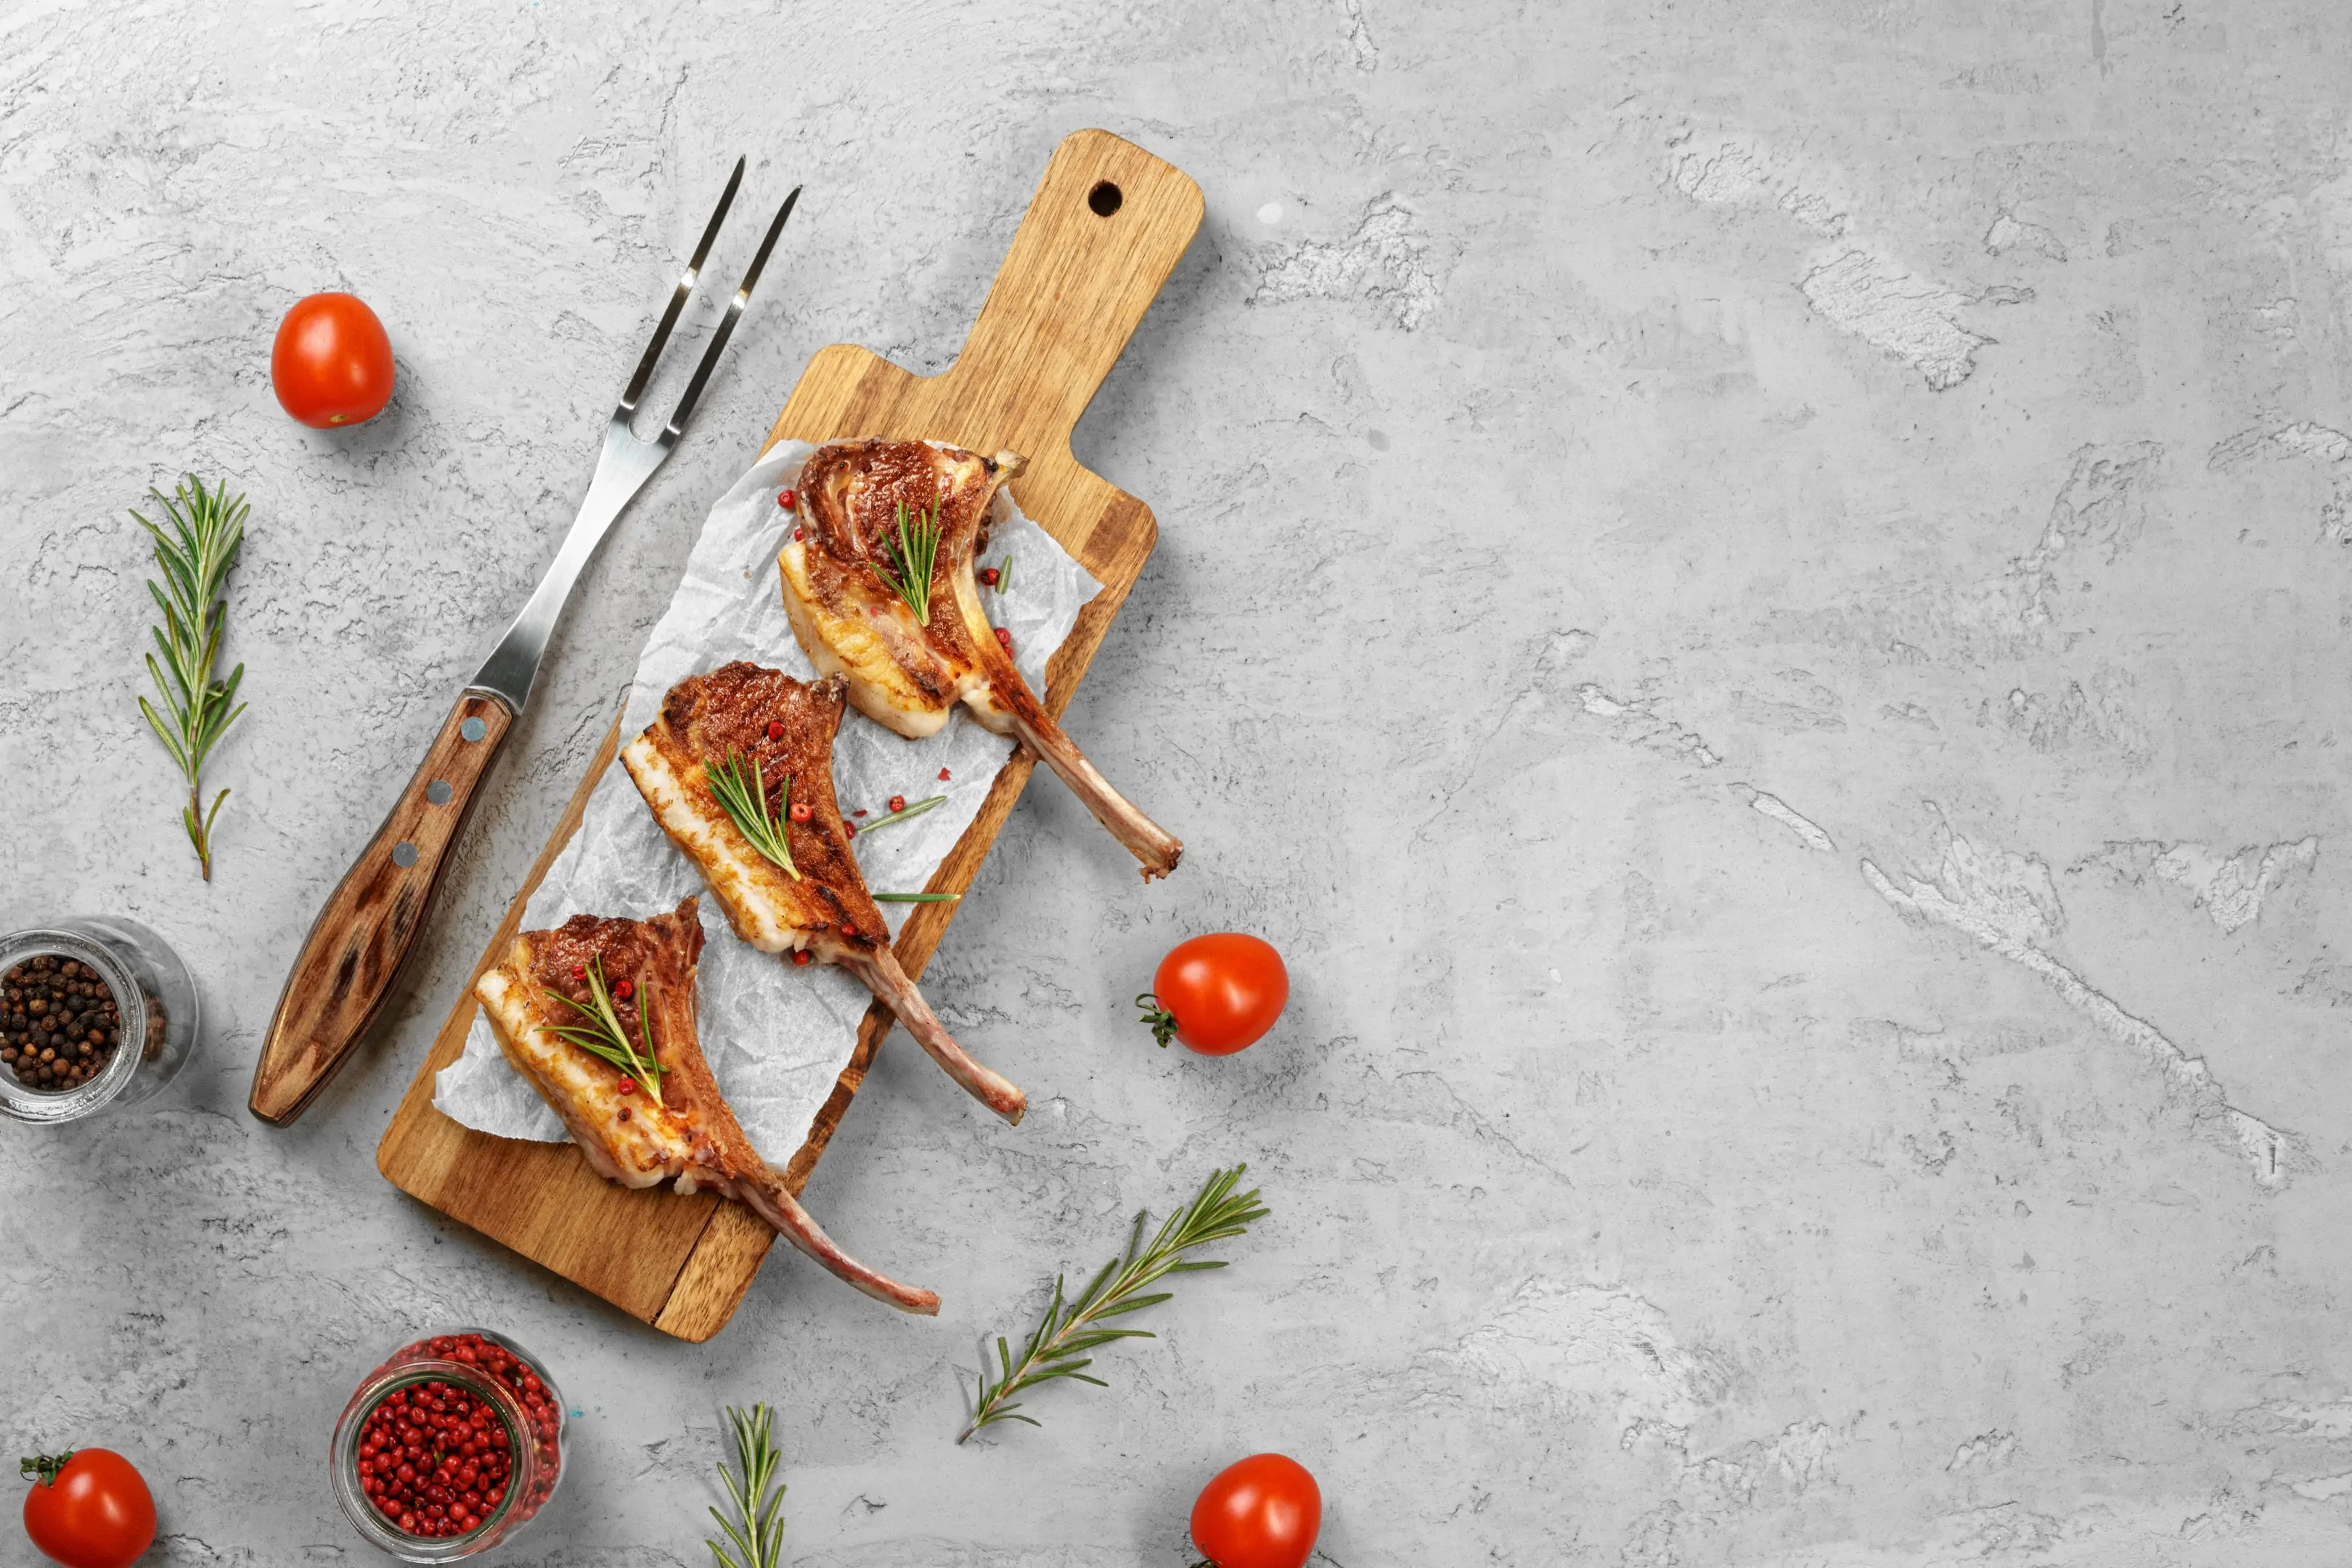 Grilled rack of lamb served on wooden board